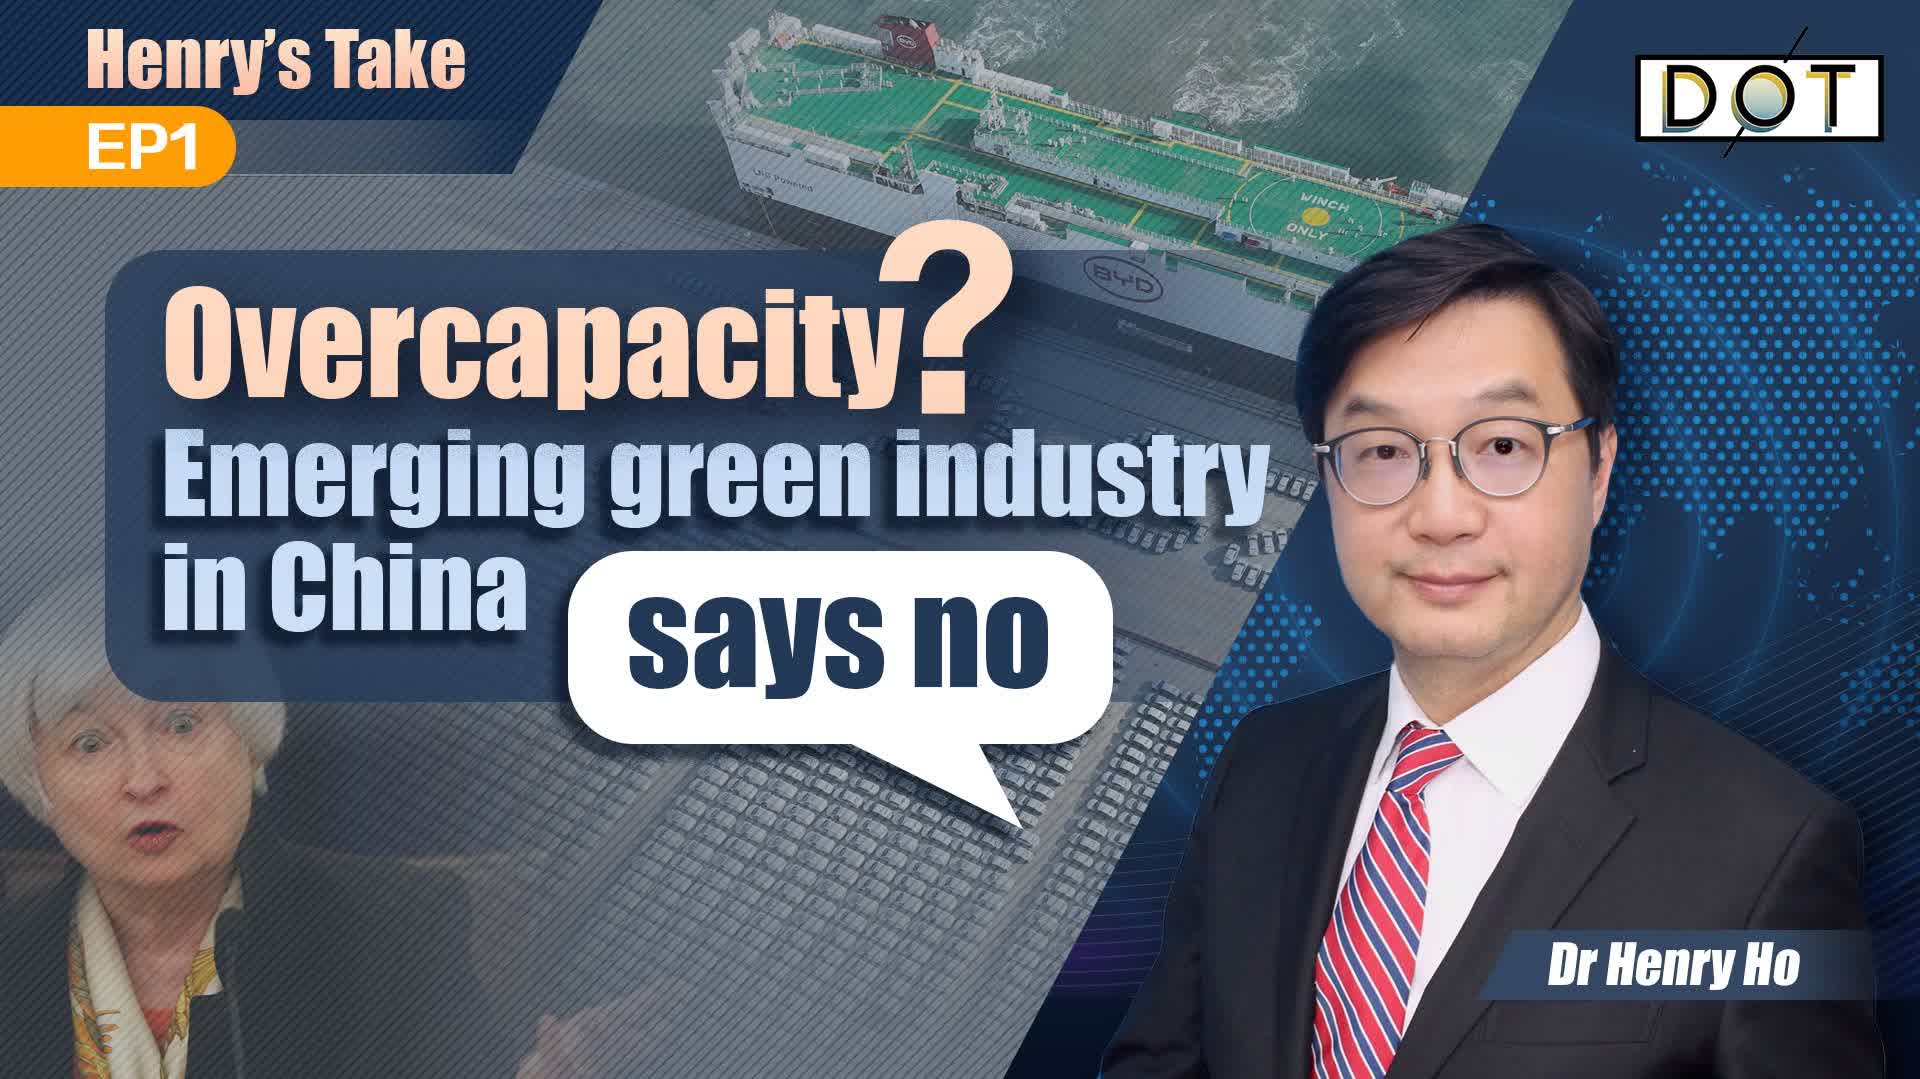 Henry's Take EP1 | Overcapacity? Emerging green industry in China says no